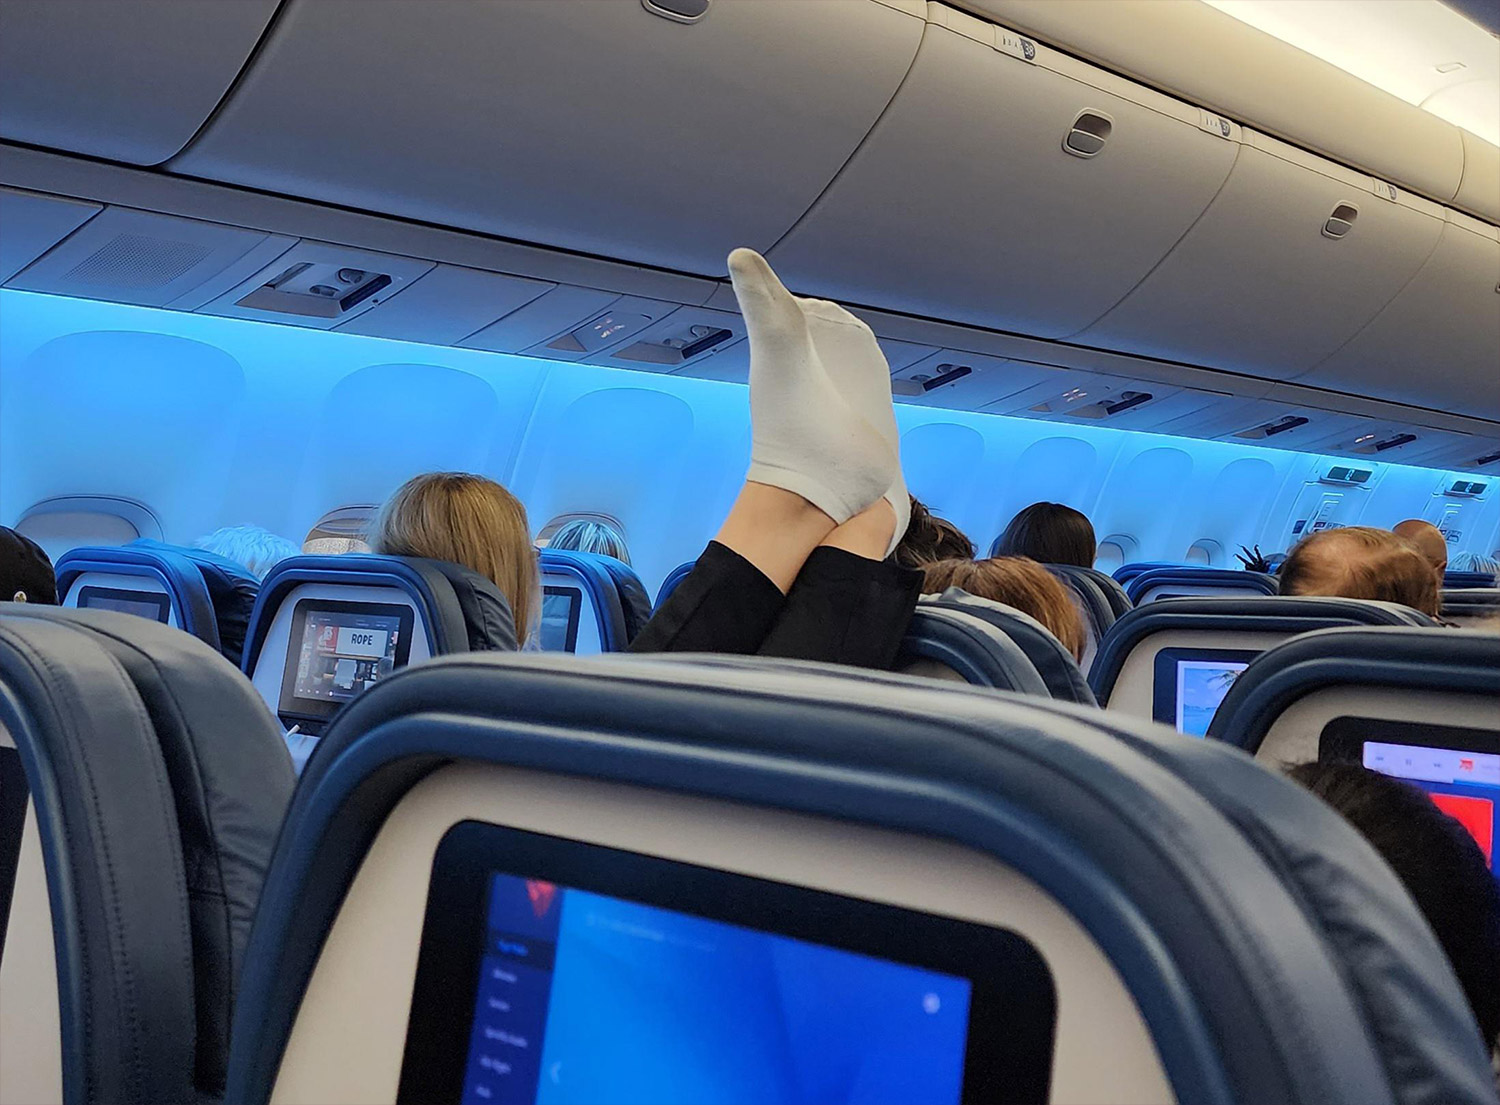 Passenger putting their smelly feet on the headrest during a flight.